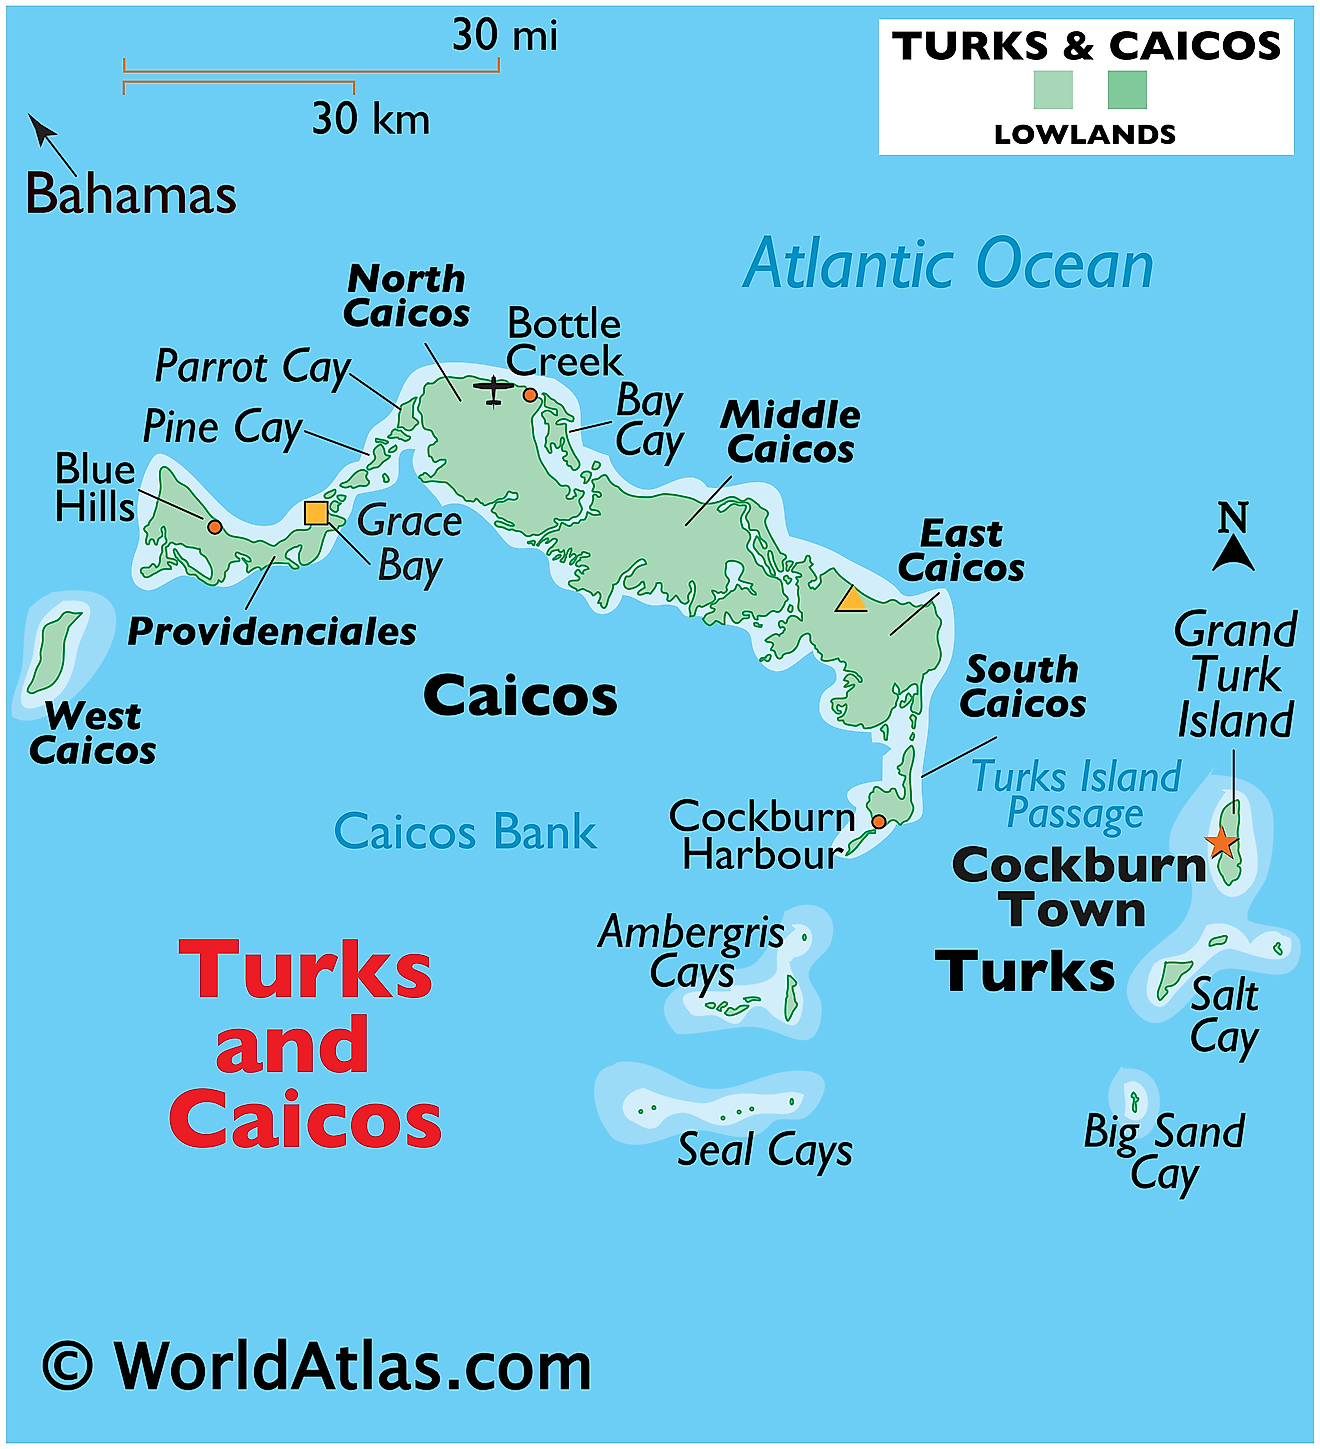 Physical Map of Turks and Caicos Islands showing relief, two main island groups, bays, cays, Turk Island Passage, etc.